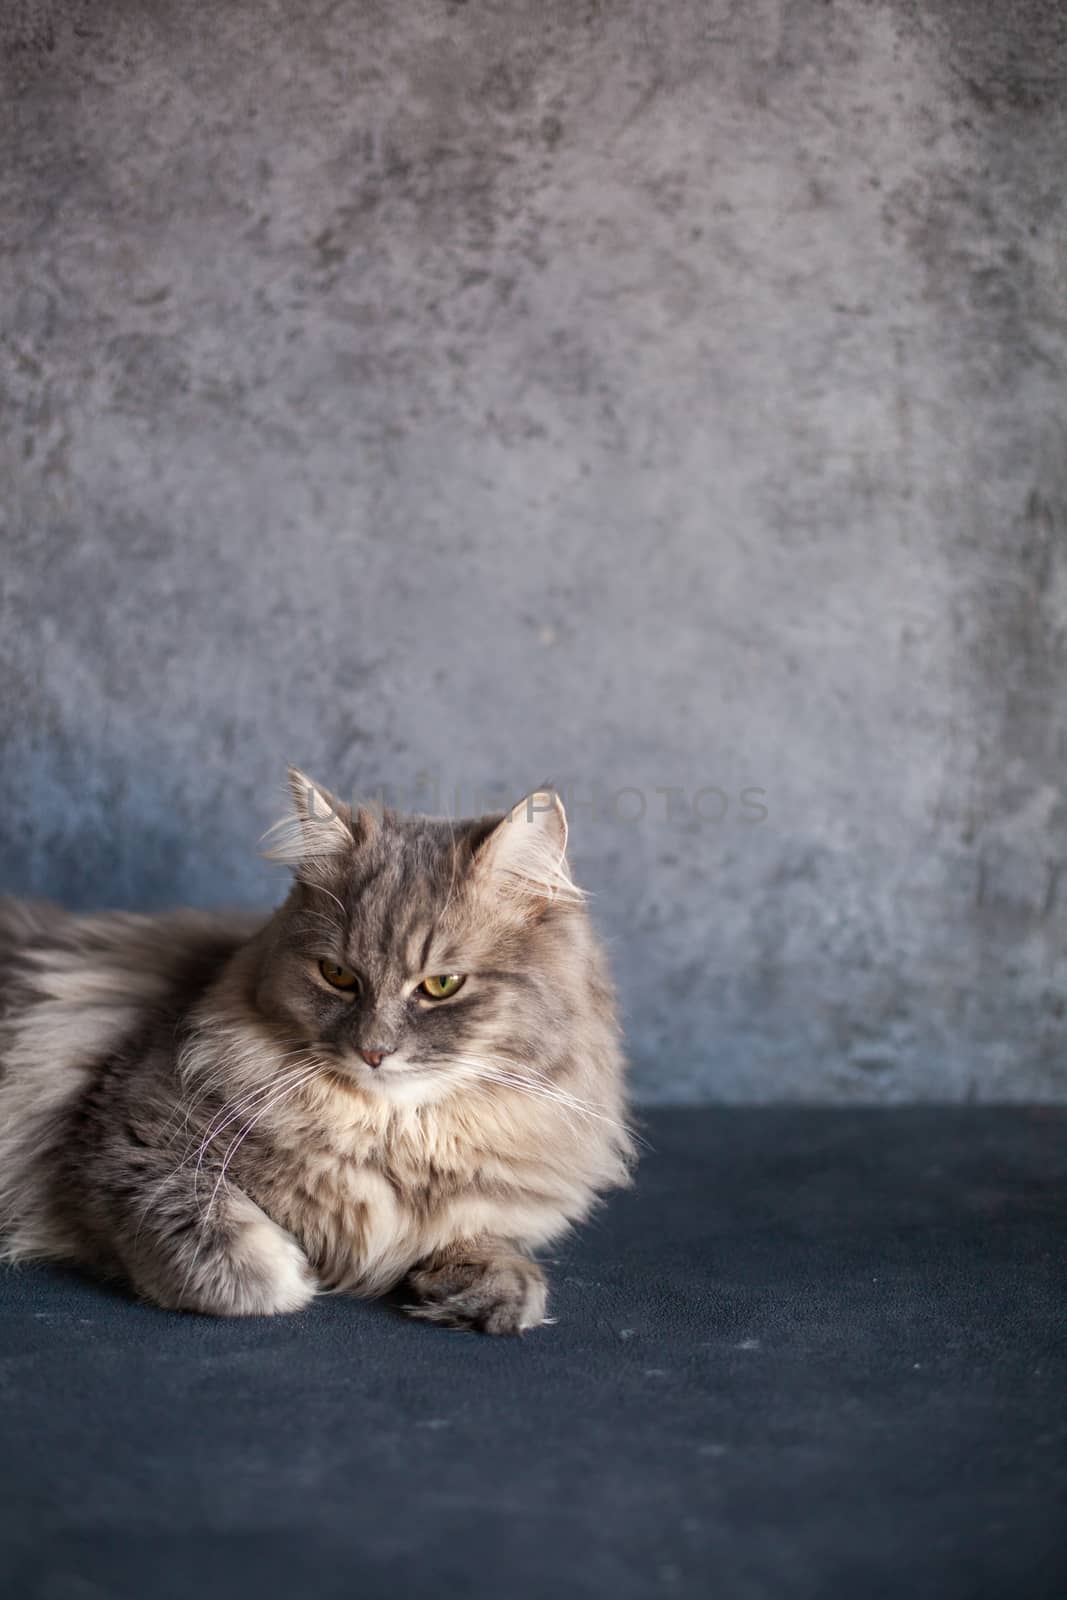 beautiful cute fluffy woolly shaggy striped gray domestic cat with yellow eyes sitting on dark background. Image for veterinary clinics, sites about cats. Selective focus. Space for text.